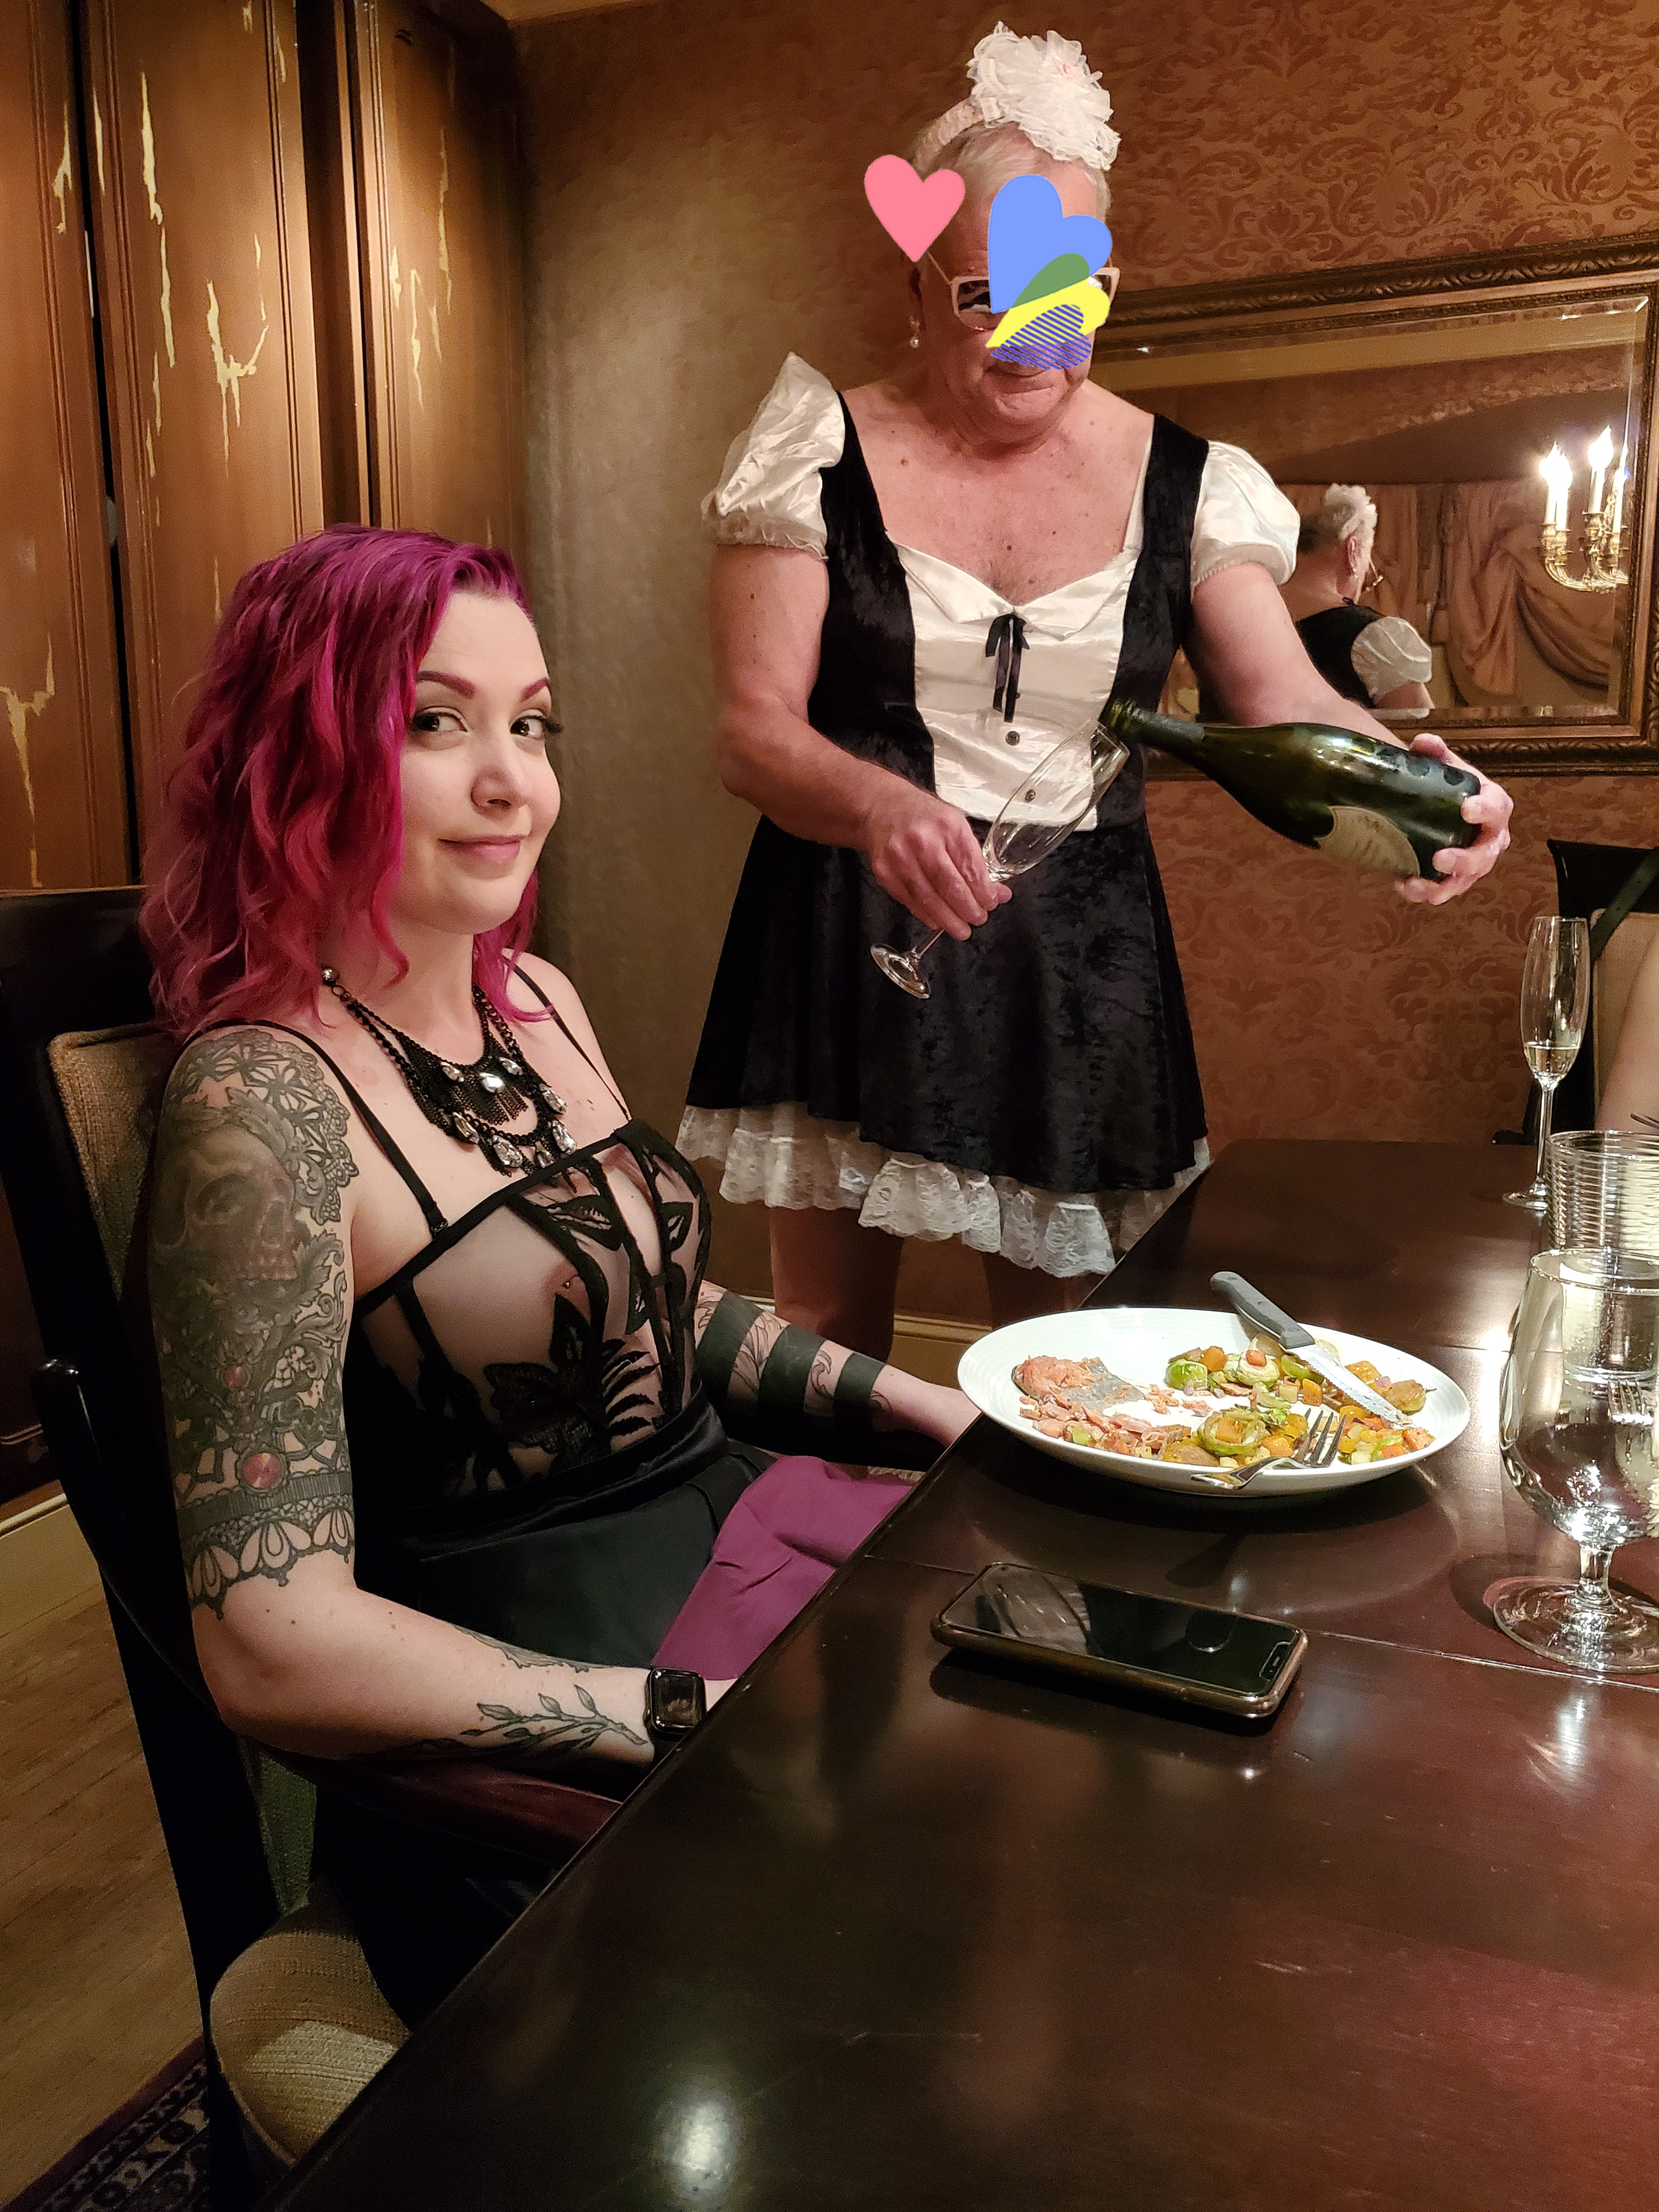 Femdom Dinner Cooking BDSM Fetish pic picture